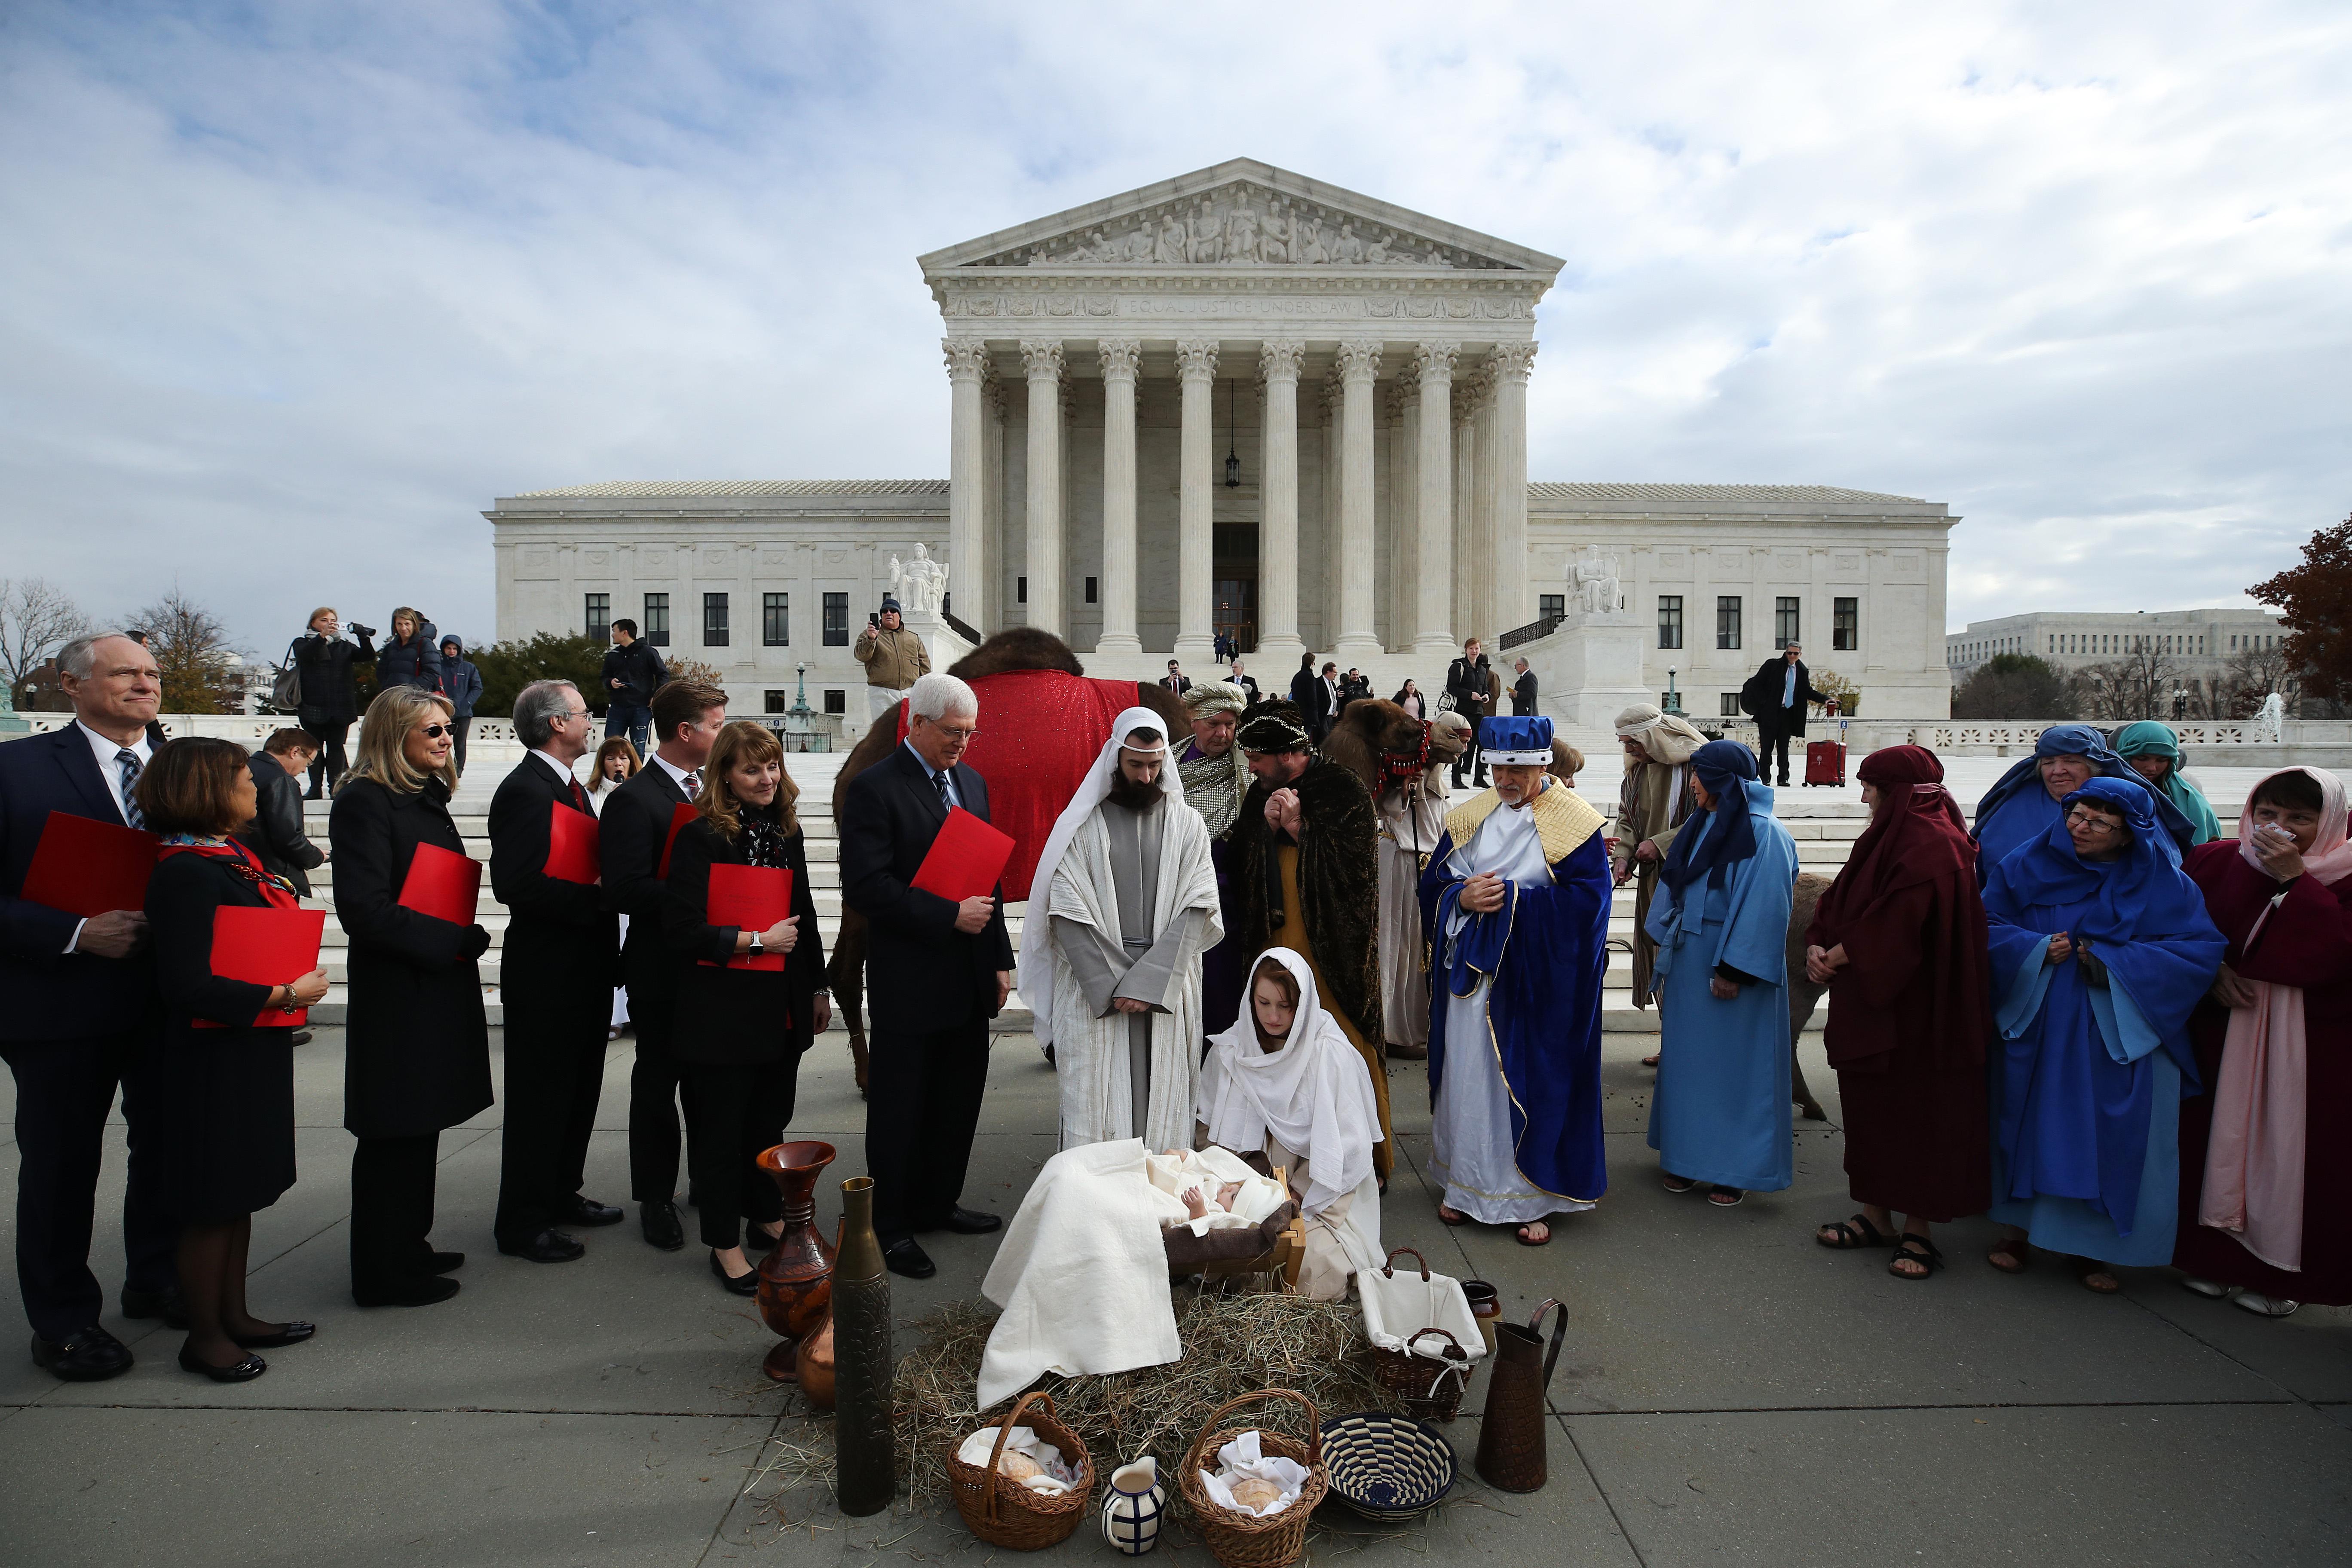 Actors portraying Jesus and Mary stage a nativity scene on the sidewalk in front of the Supreme Court.